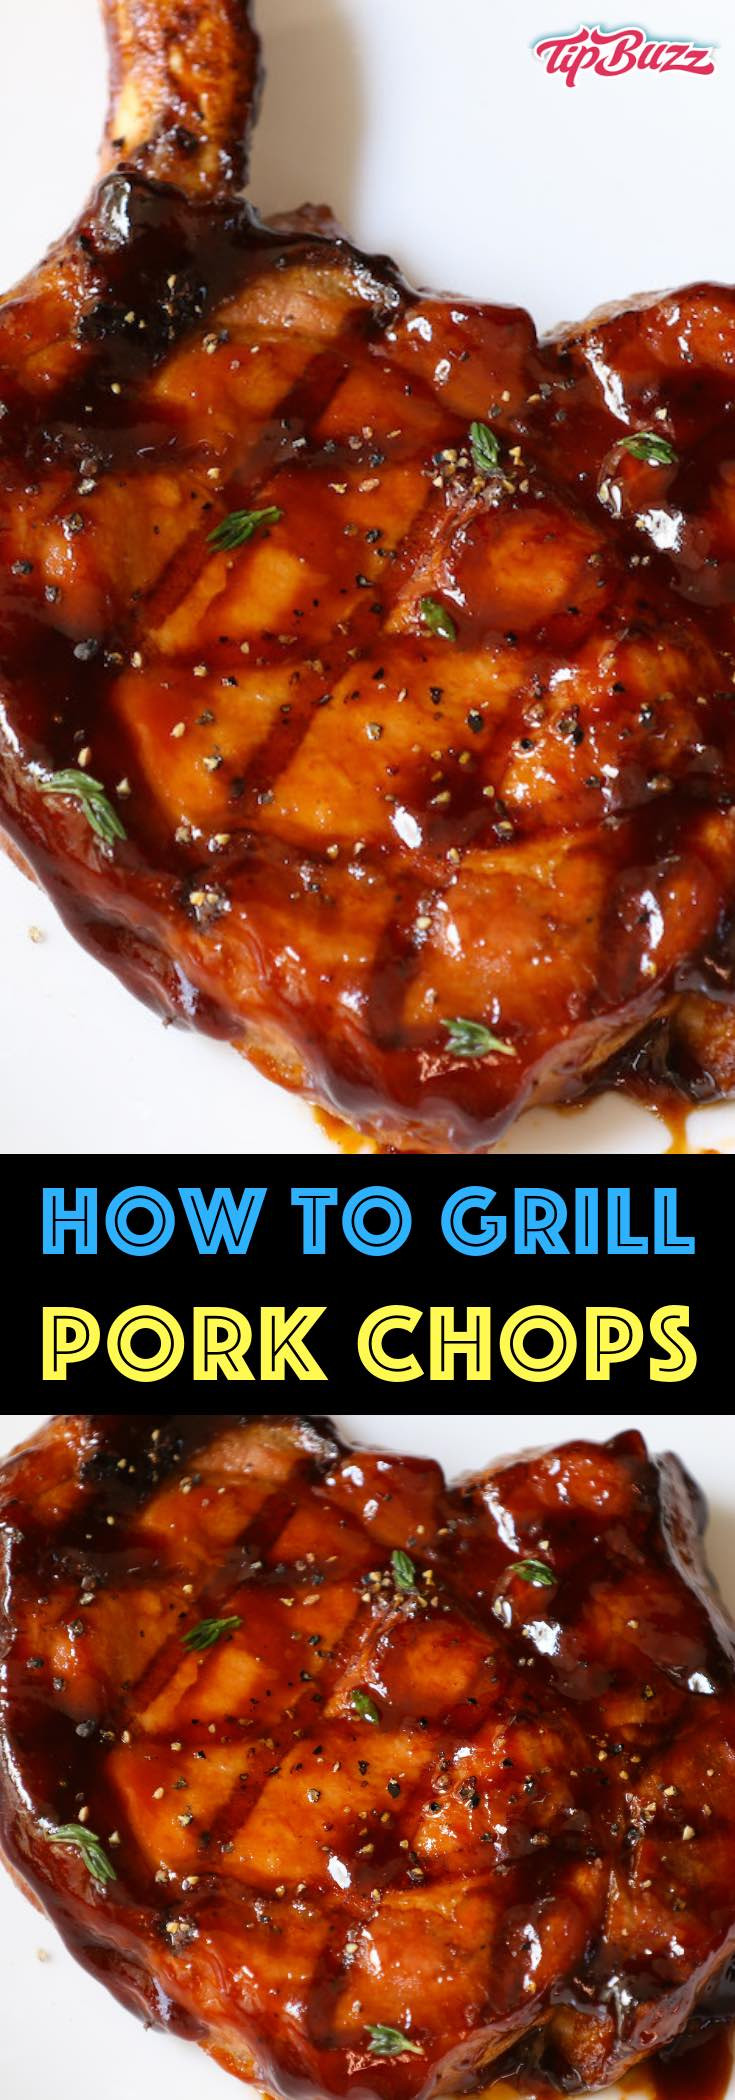 Pork Chops Grill Time
 How Long to Grill Pork Chops TipBuzz